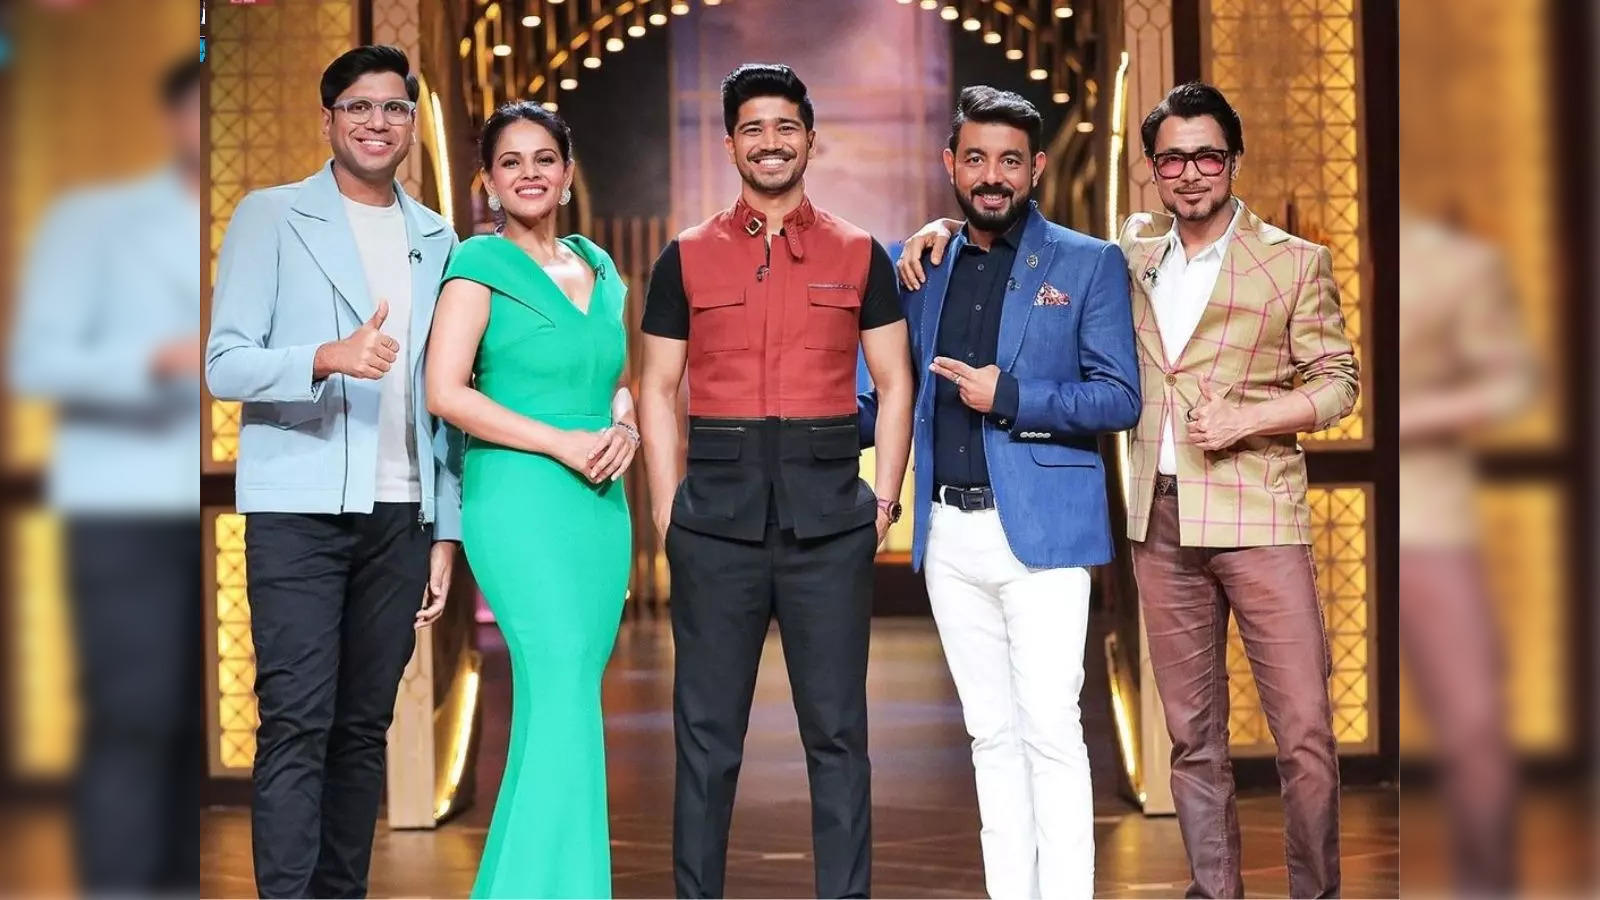 Watch Shark Tank India Online - All Latest Episodes Available on Sony LIV